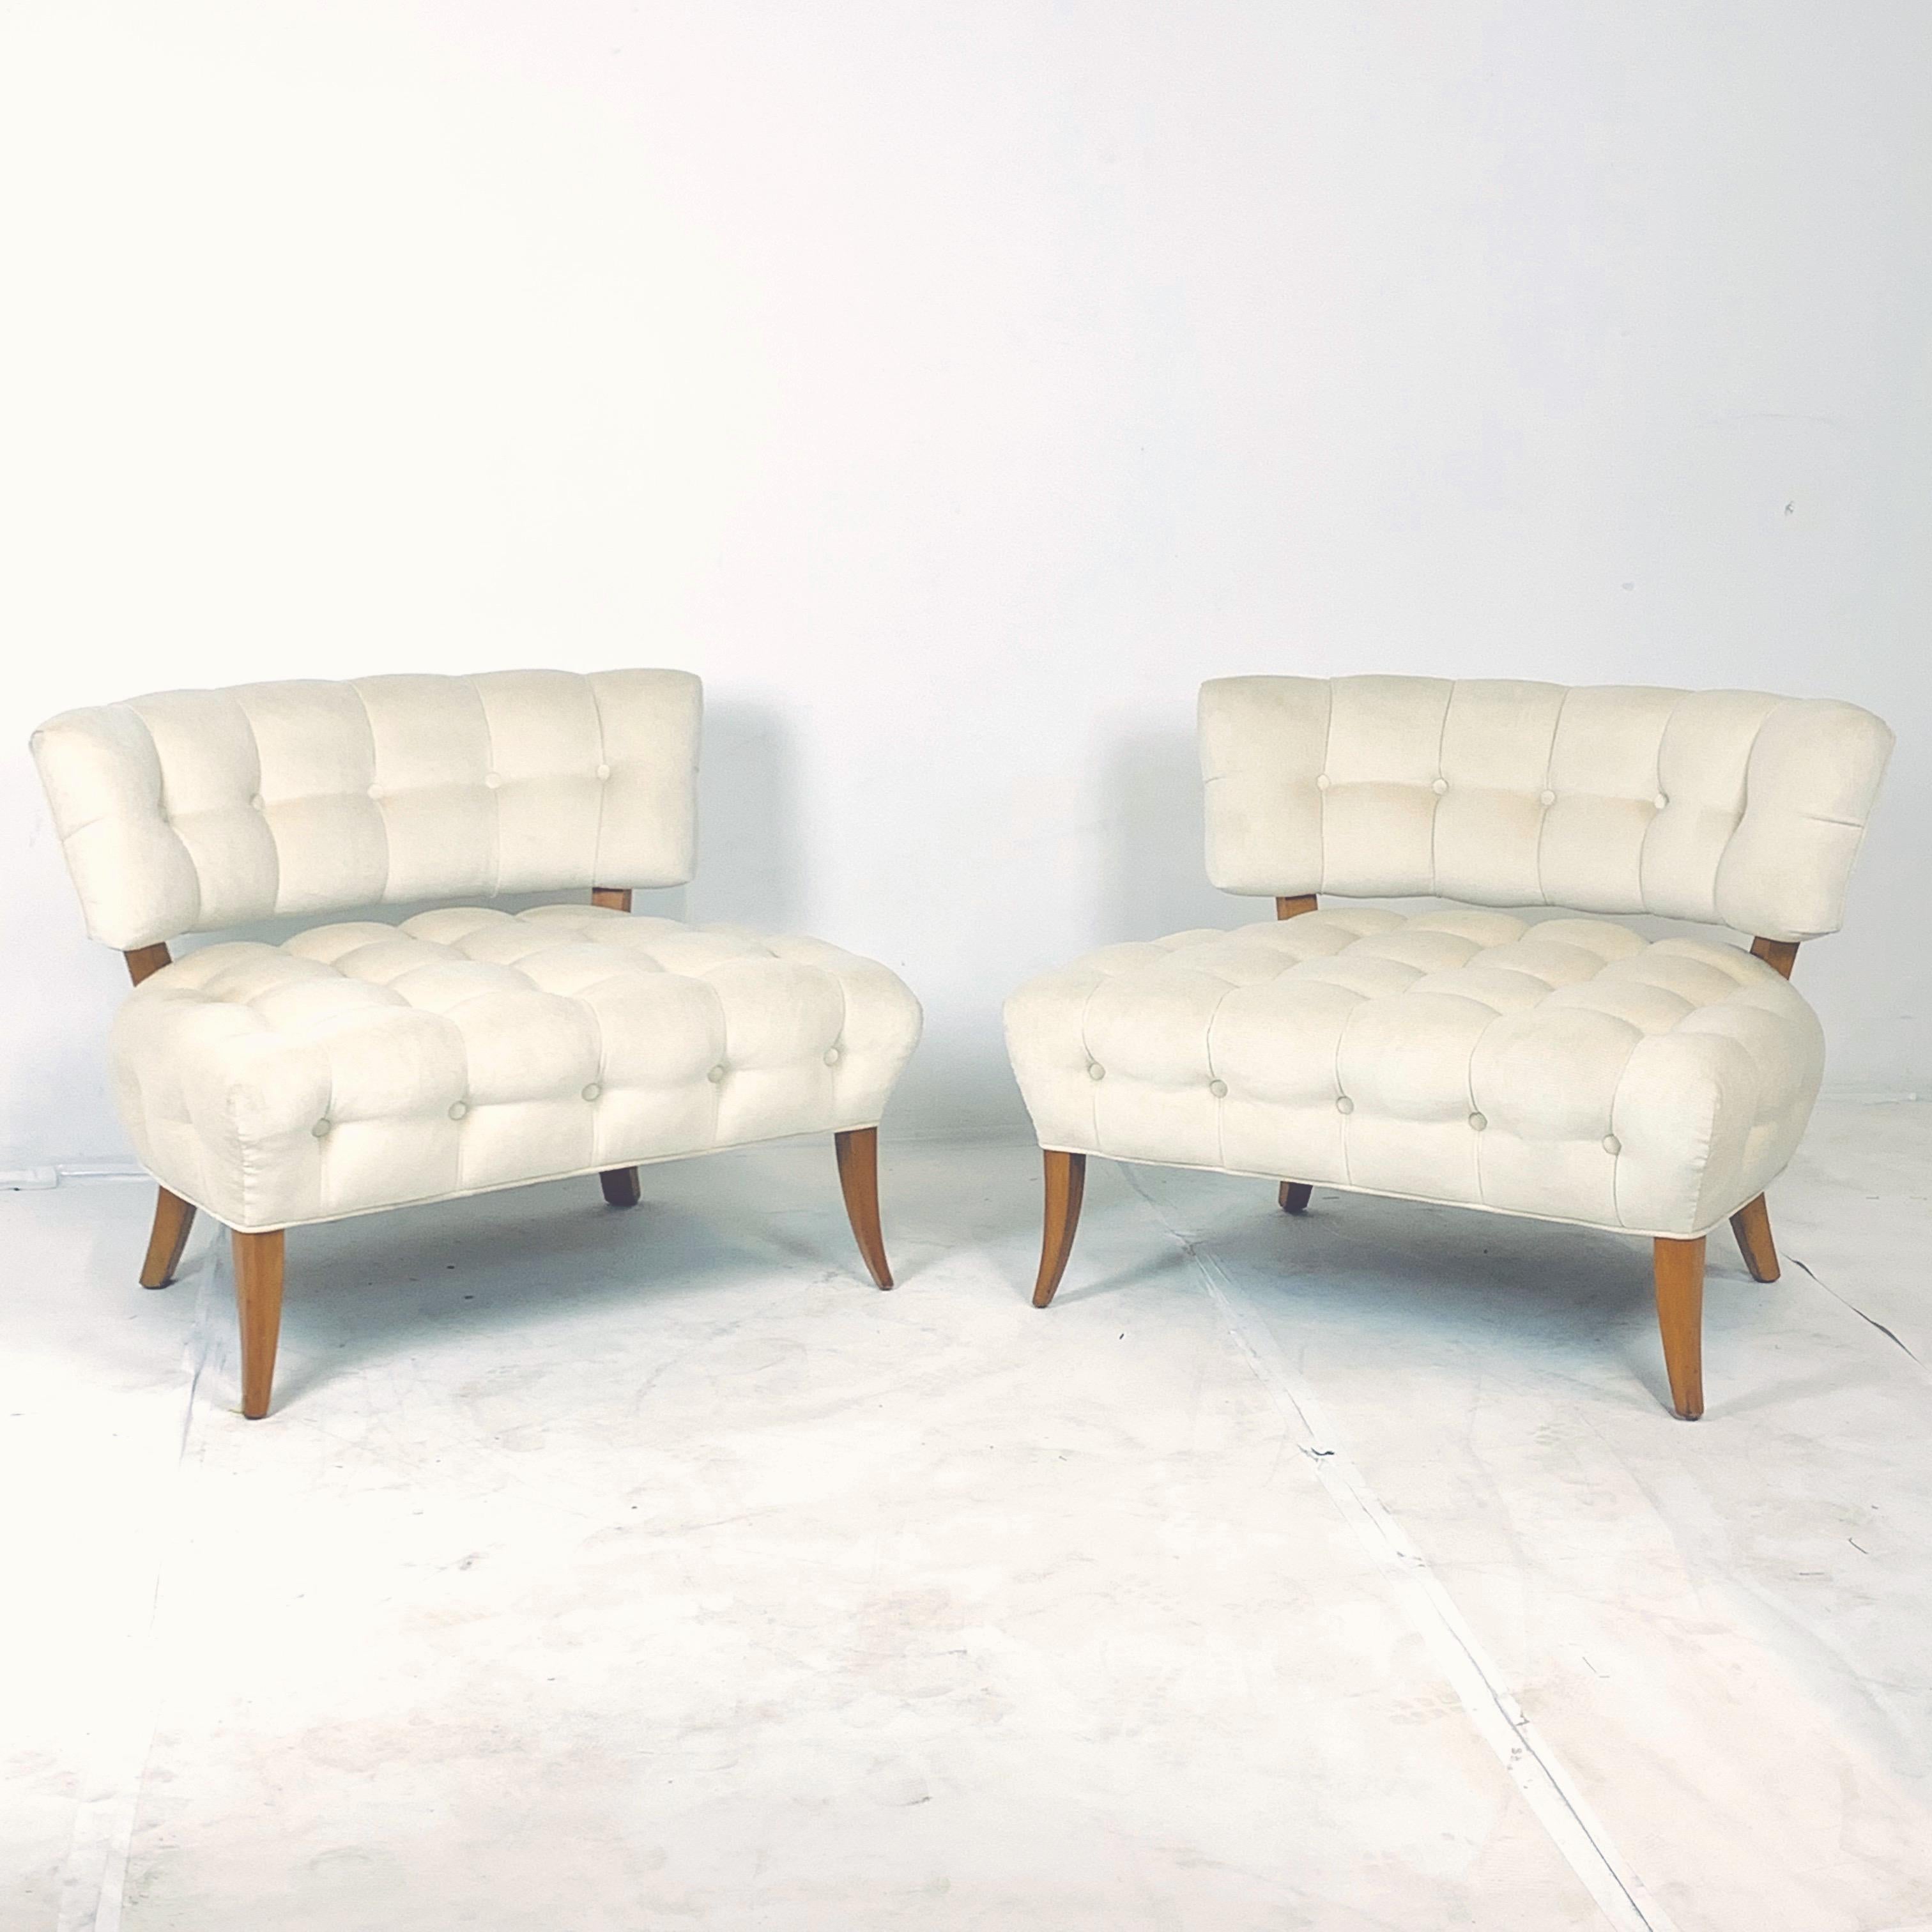 Stunning pair of comfortable larger scale tufted lounge chairs by designer William 